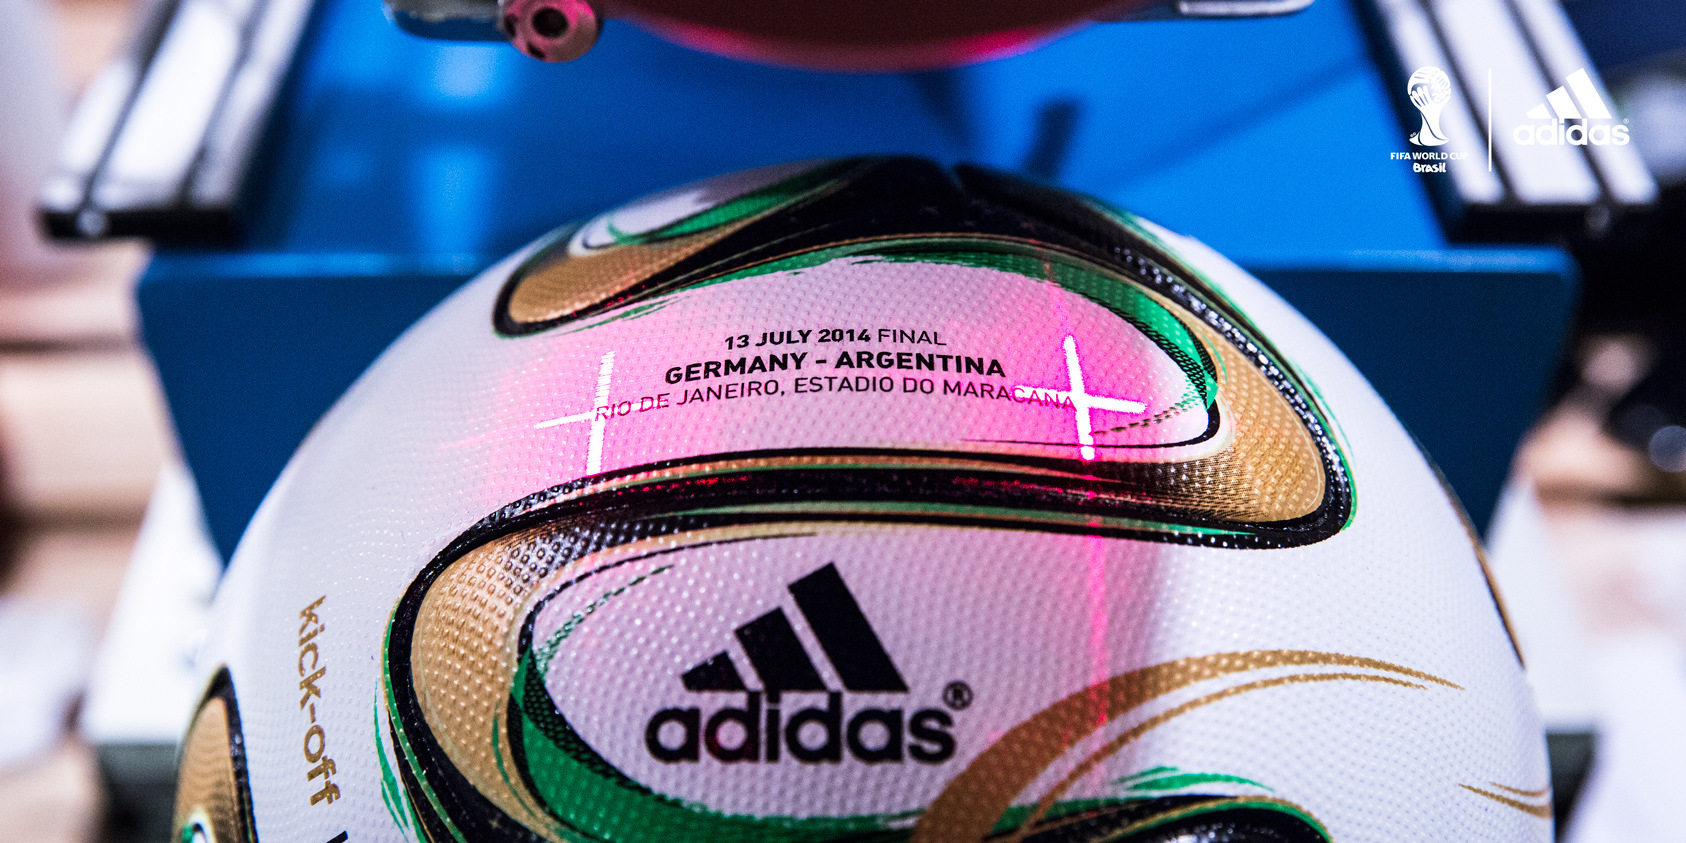 Adidas shows off the official ball to be used in the World Cup